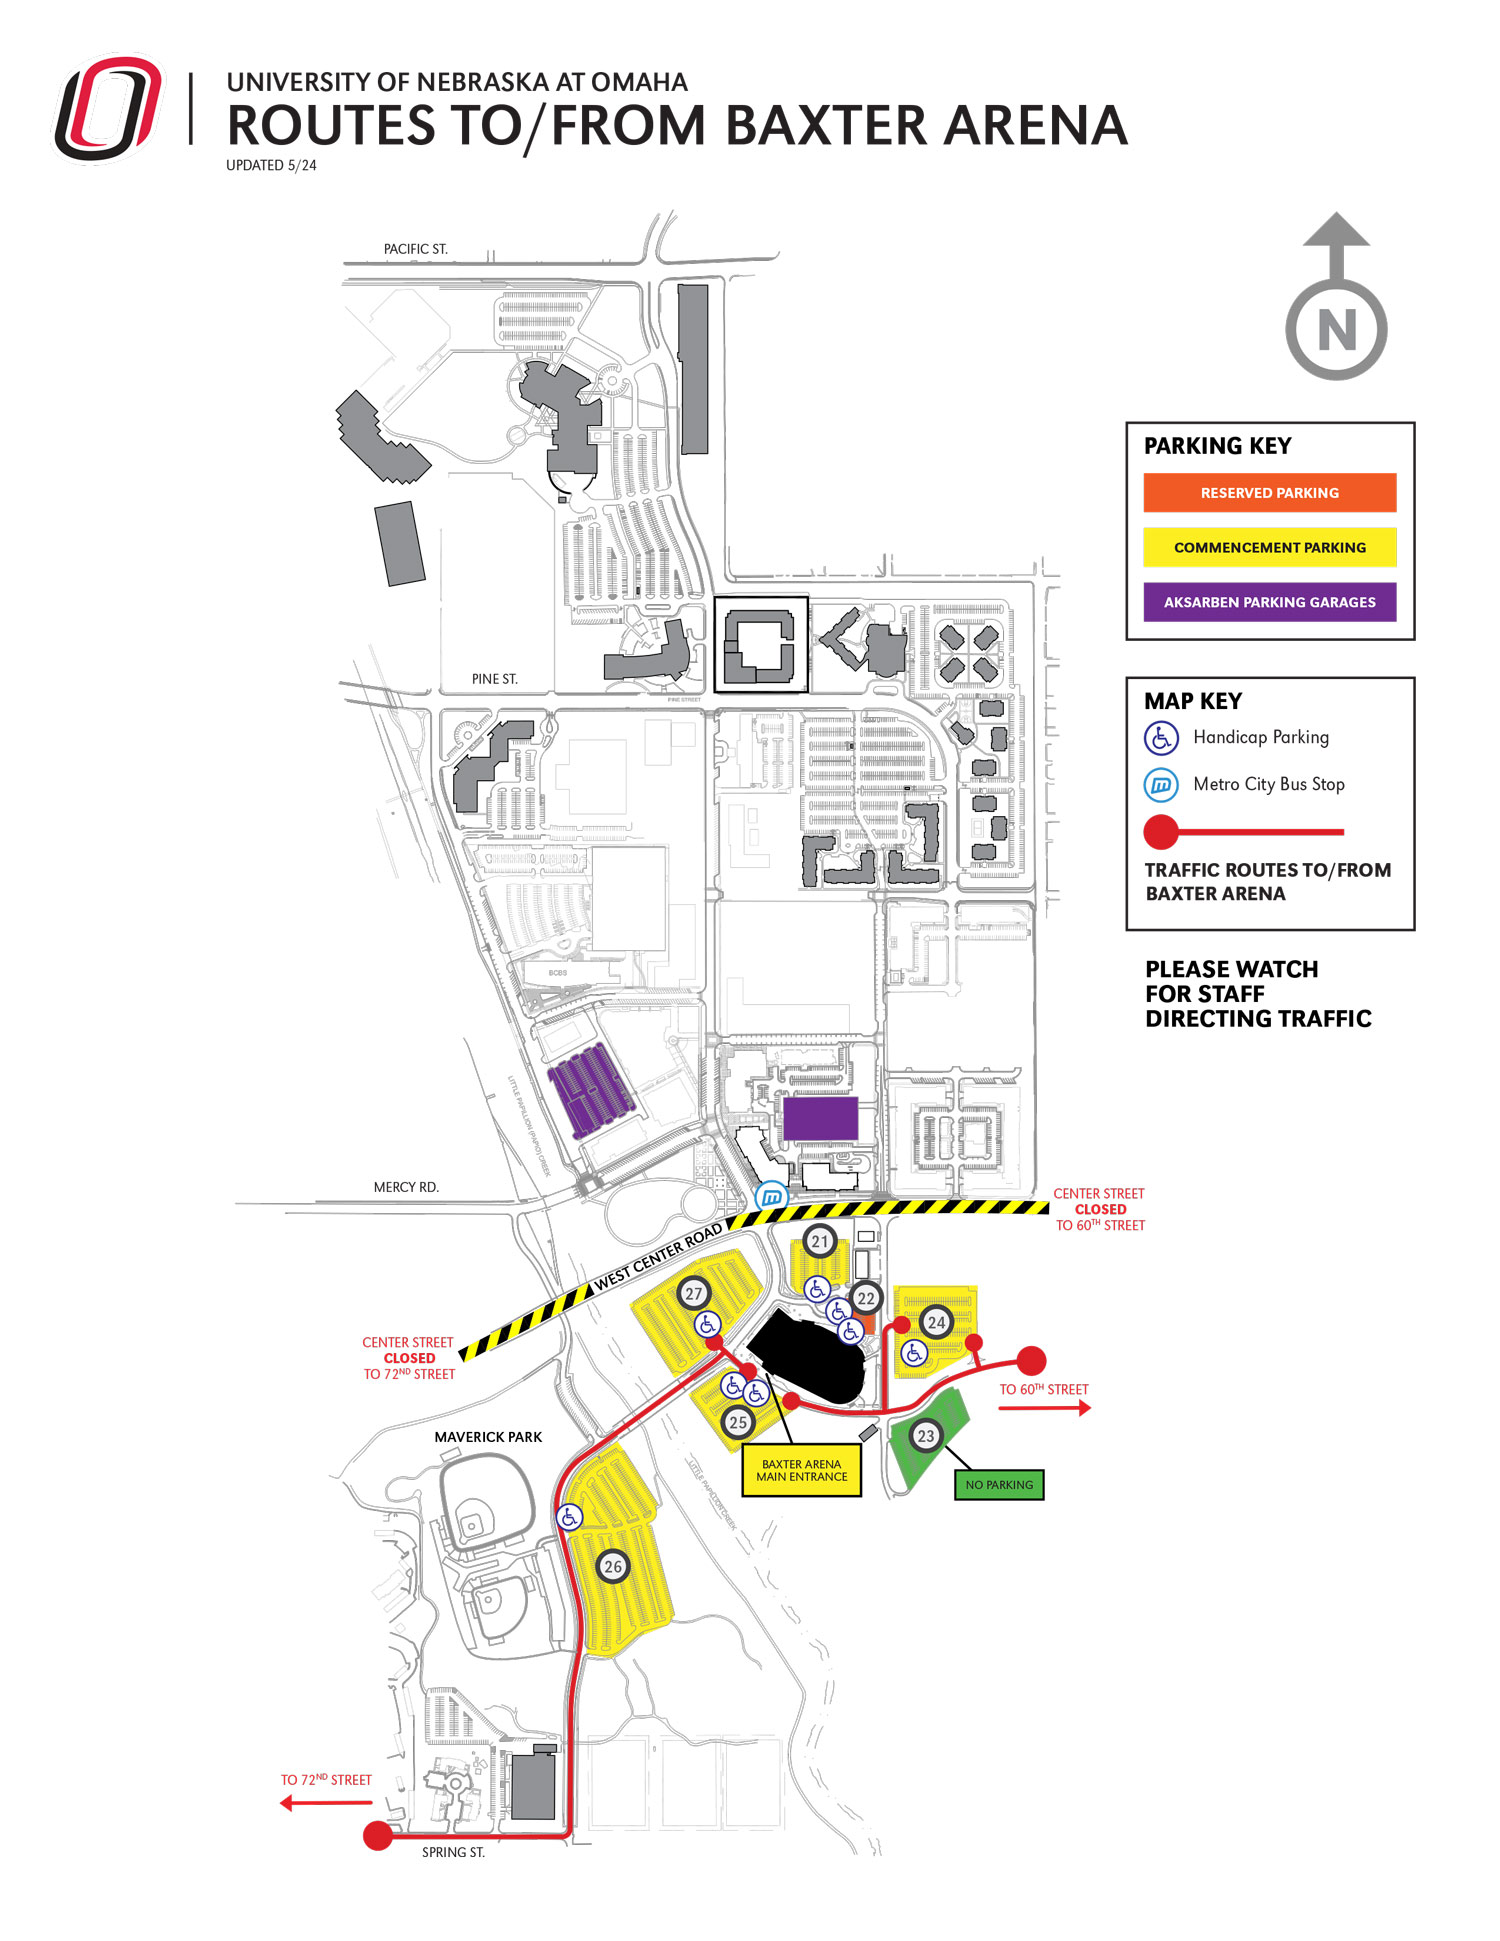 Baxter Arena routes map